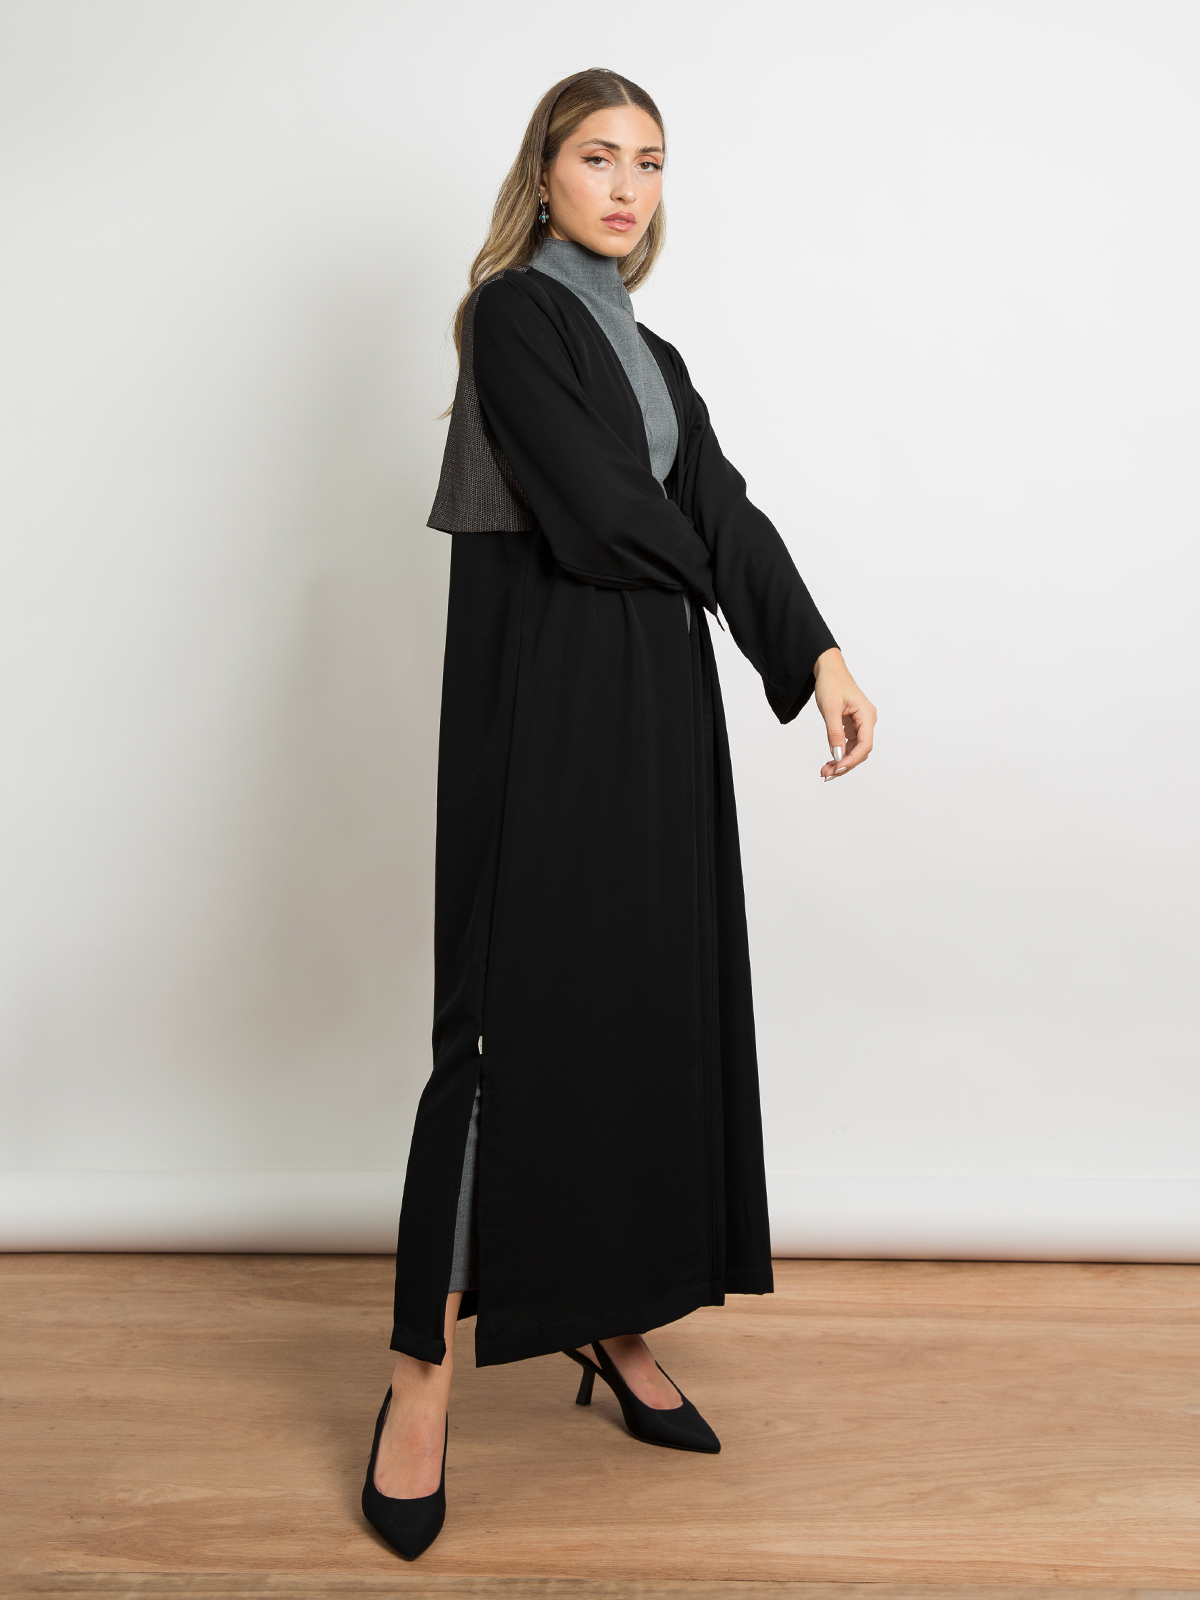 Black with Black Beehive - Casual Regular-fit Long Open Abaya in Soft Fabric with Yoke